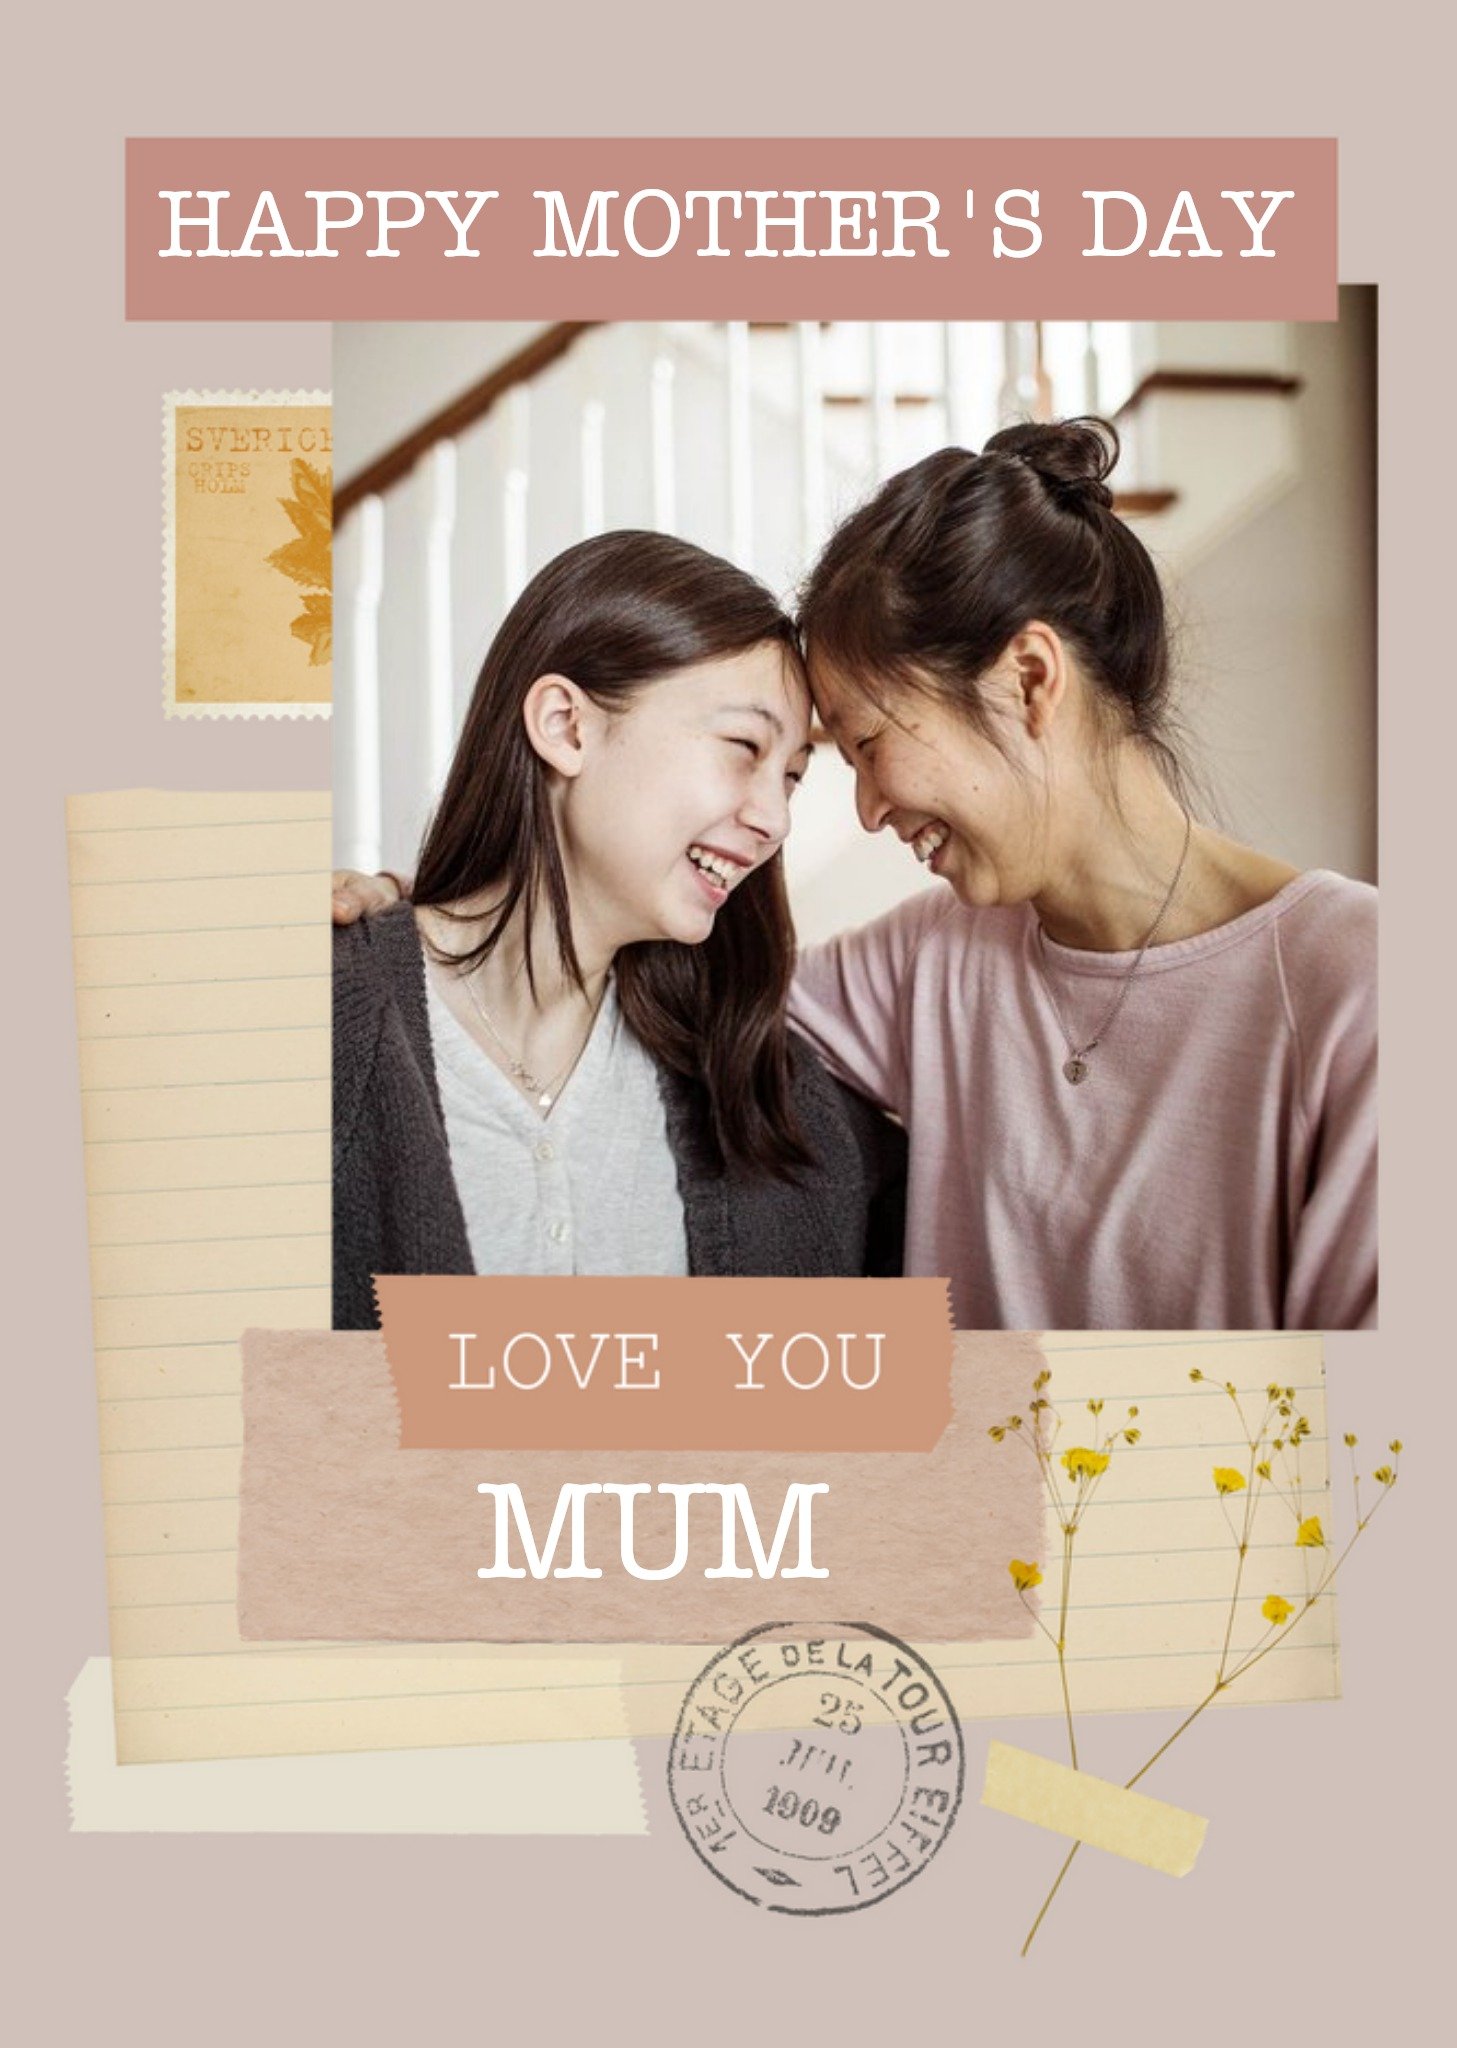 Moonpig Happy Mother's Day Mum Instant Photo Personalised Mother's Day Card, Large